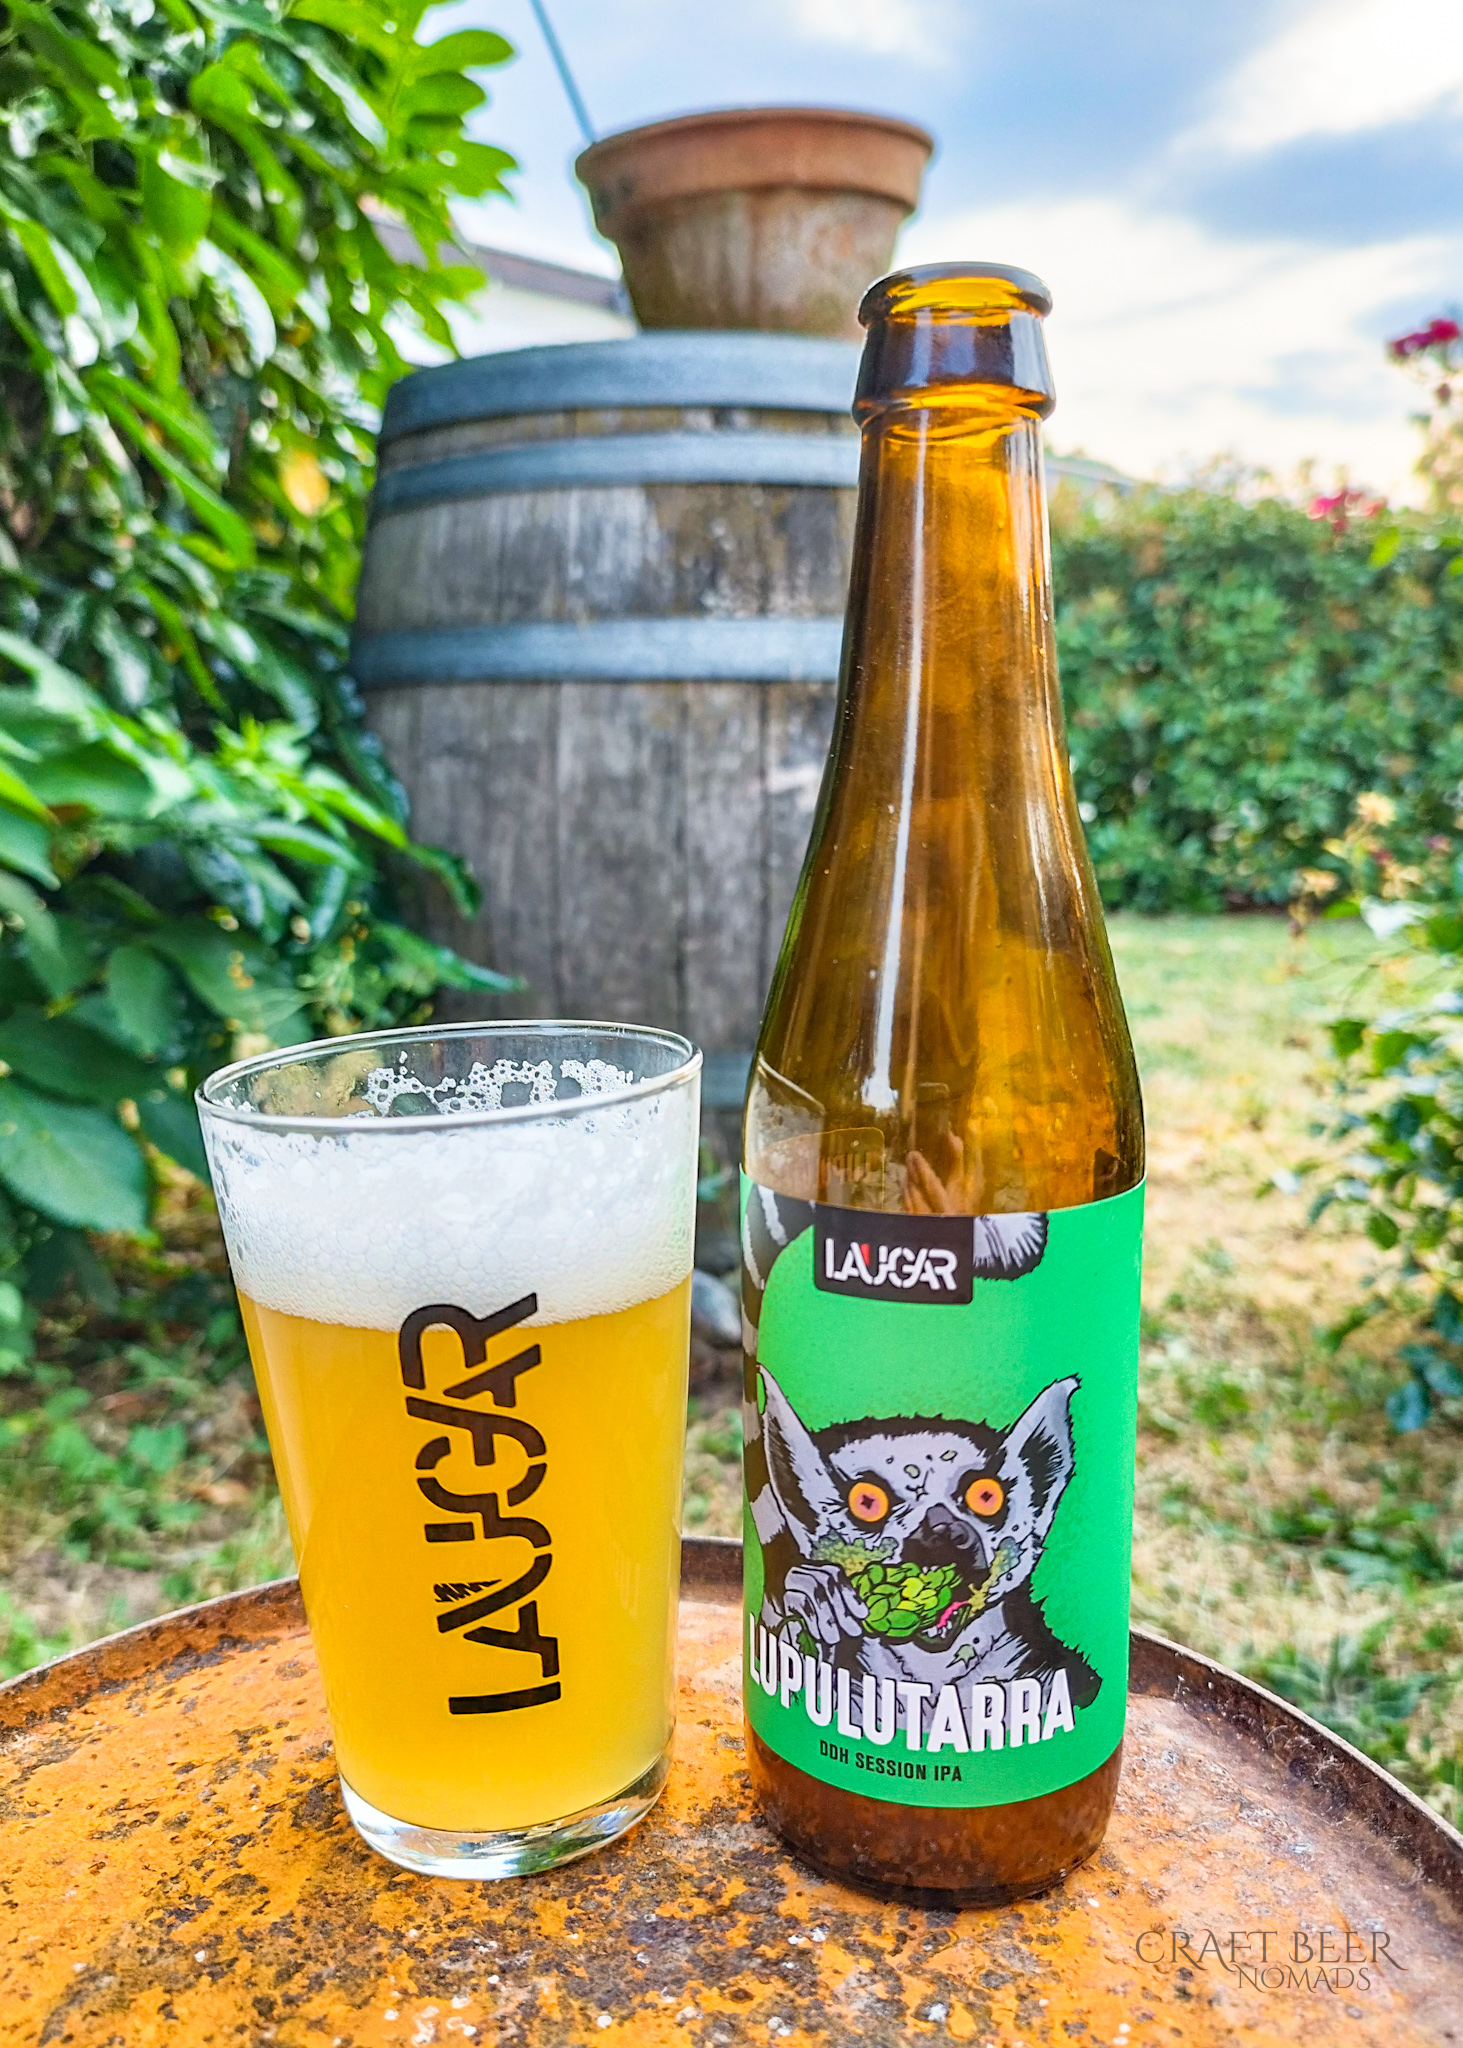 Lupulutarra Session IPA | Craft Beer in the Basque Country: Laugar Brewery | Craft Beer Nomads